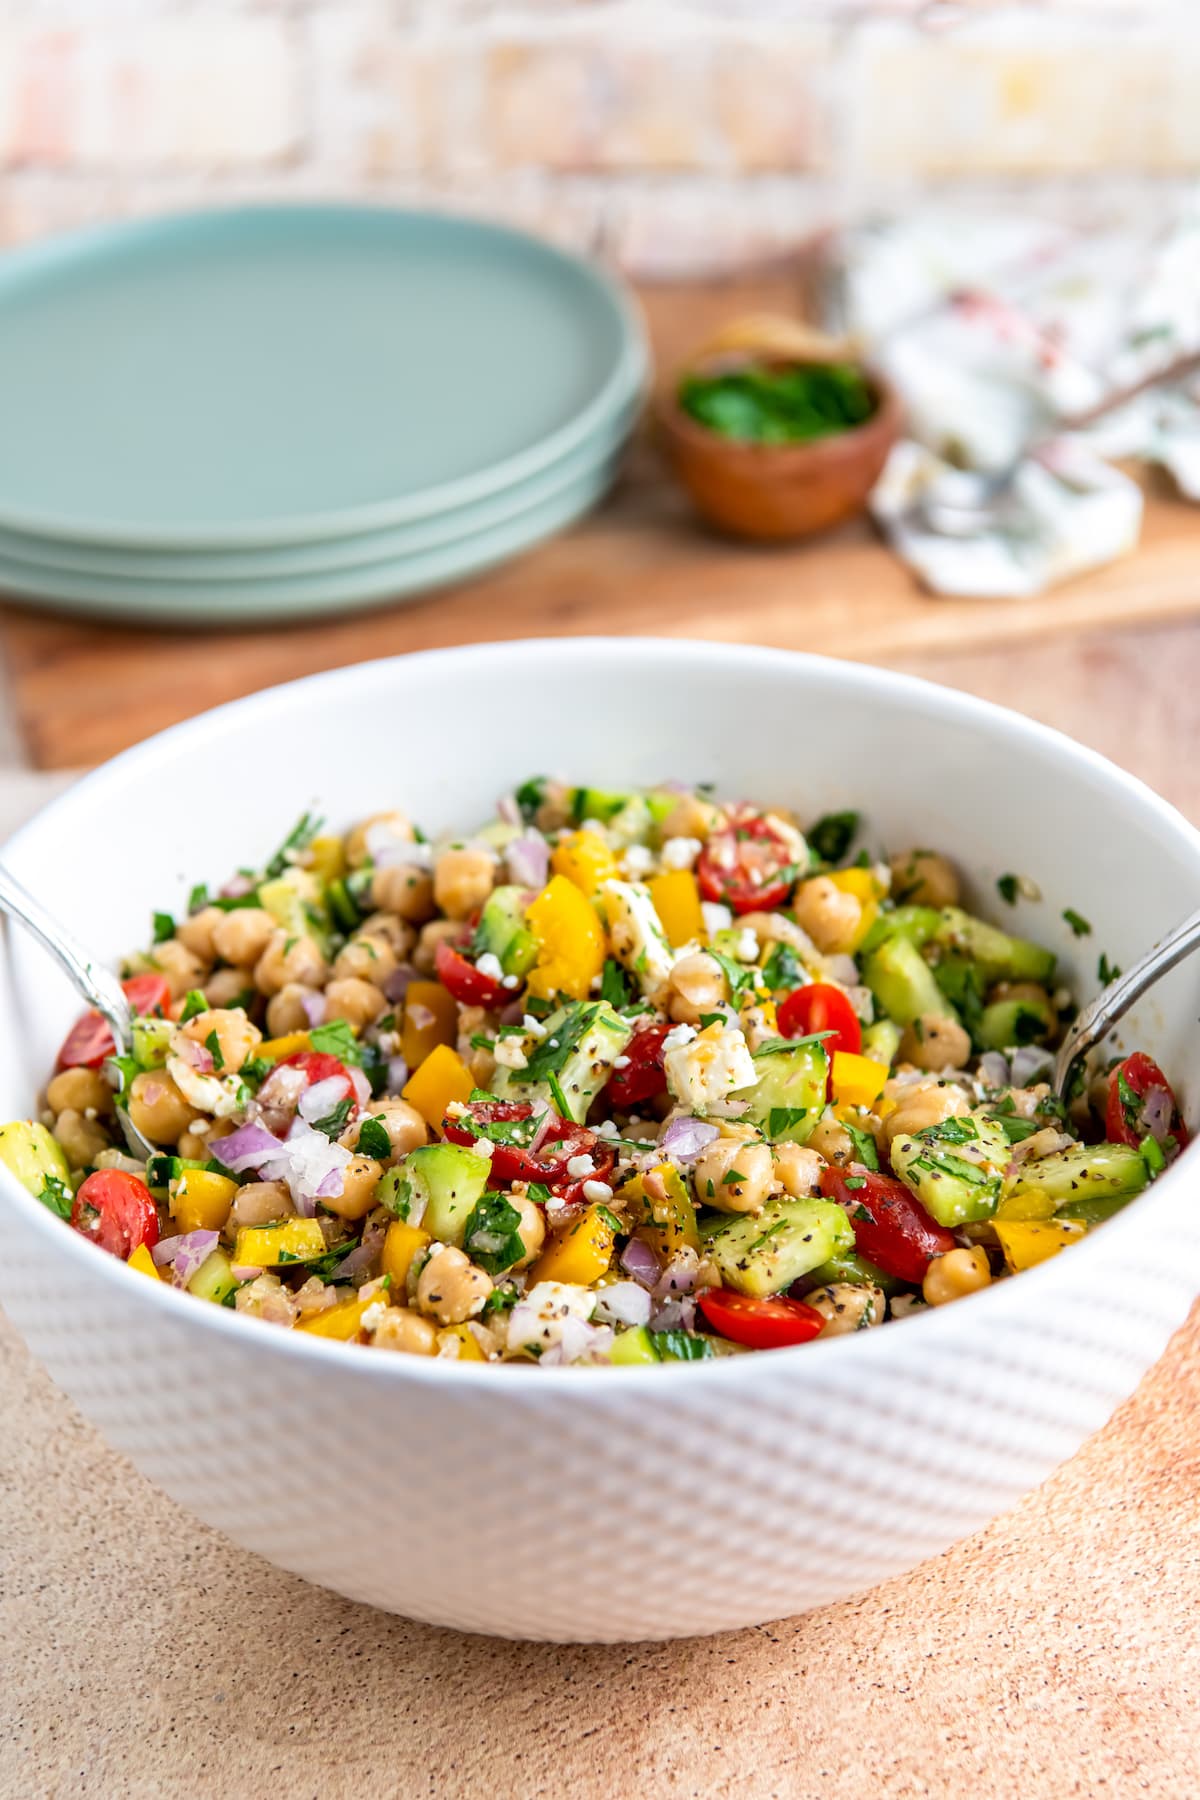 a bowl of chickpea salad with vegetables and herbs